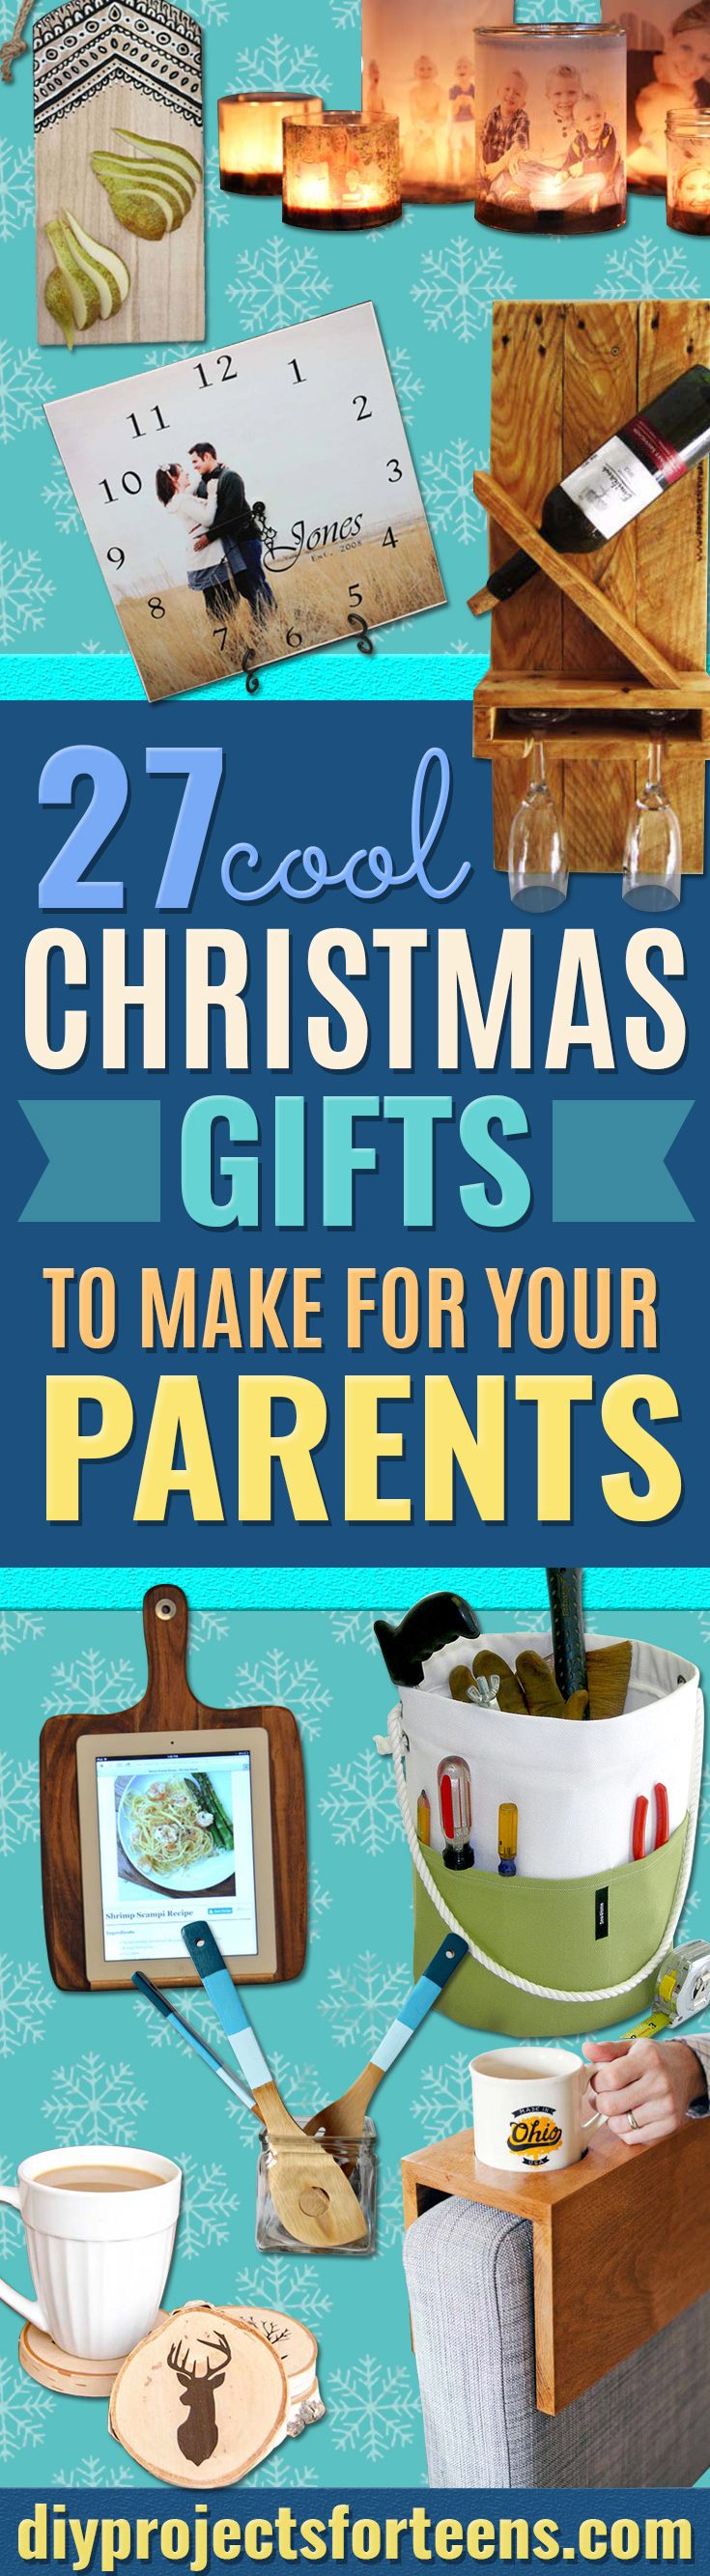 DIY Christmas Presents To Make For Parents - Cute, Easy and Cheap Crafts and Gift Ideas for Mom and Dad - Awesome Things to Make for Mothers and Fathers - Dollar Store Crafts and Cool Things to Make on A Budget for the Holidays - DIY Projects for Teens